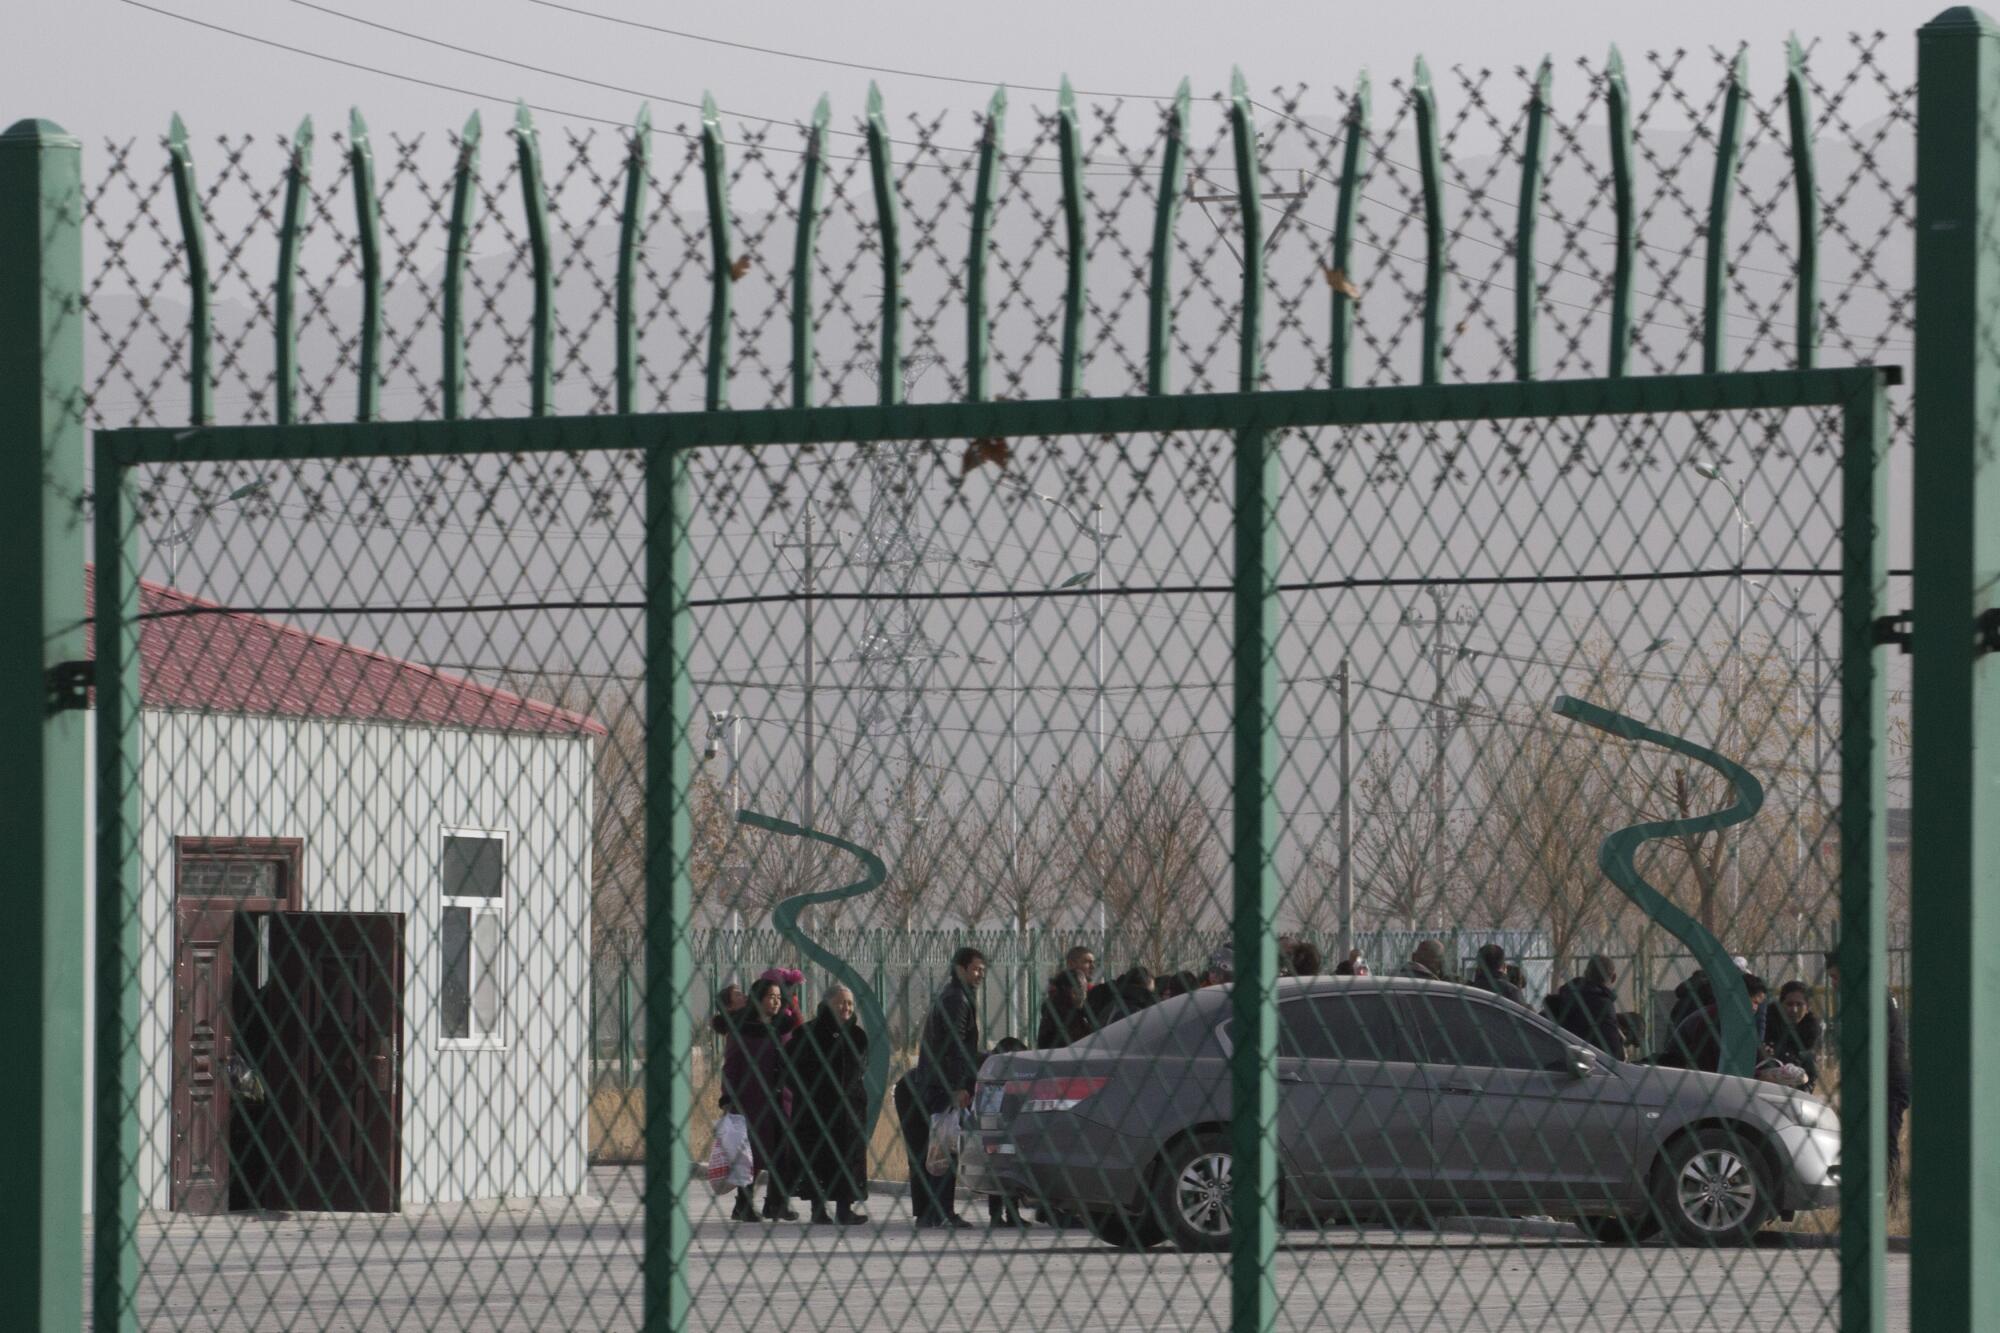 Residents line up at a site reported to be an indoctrination camp in Xinjiang, China. 